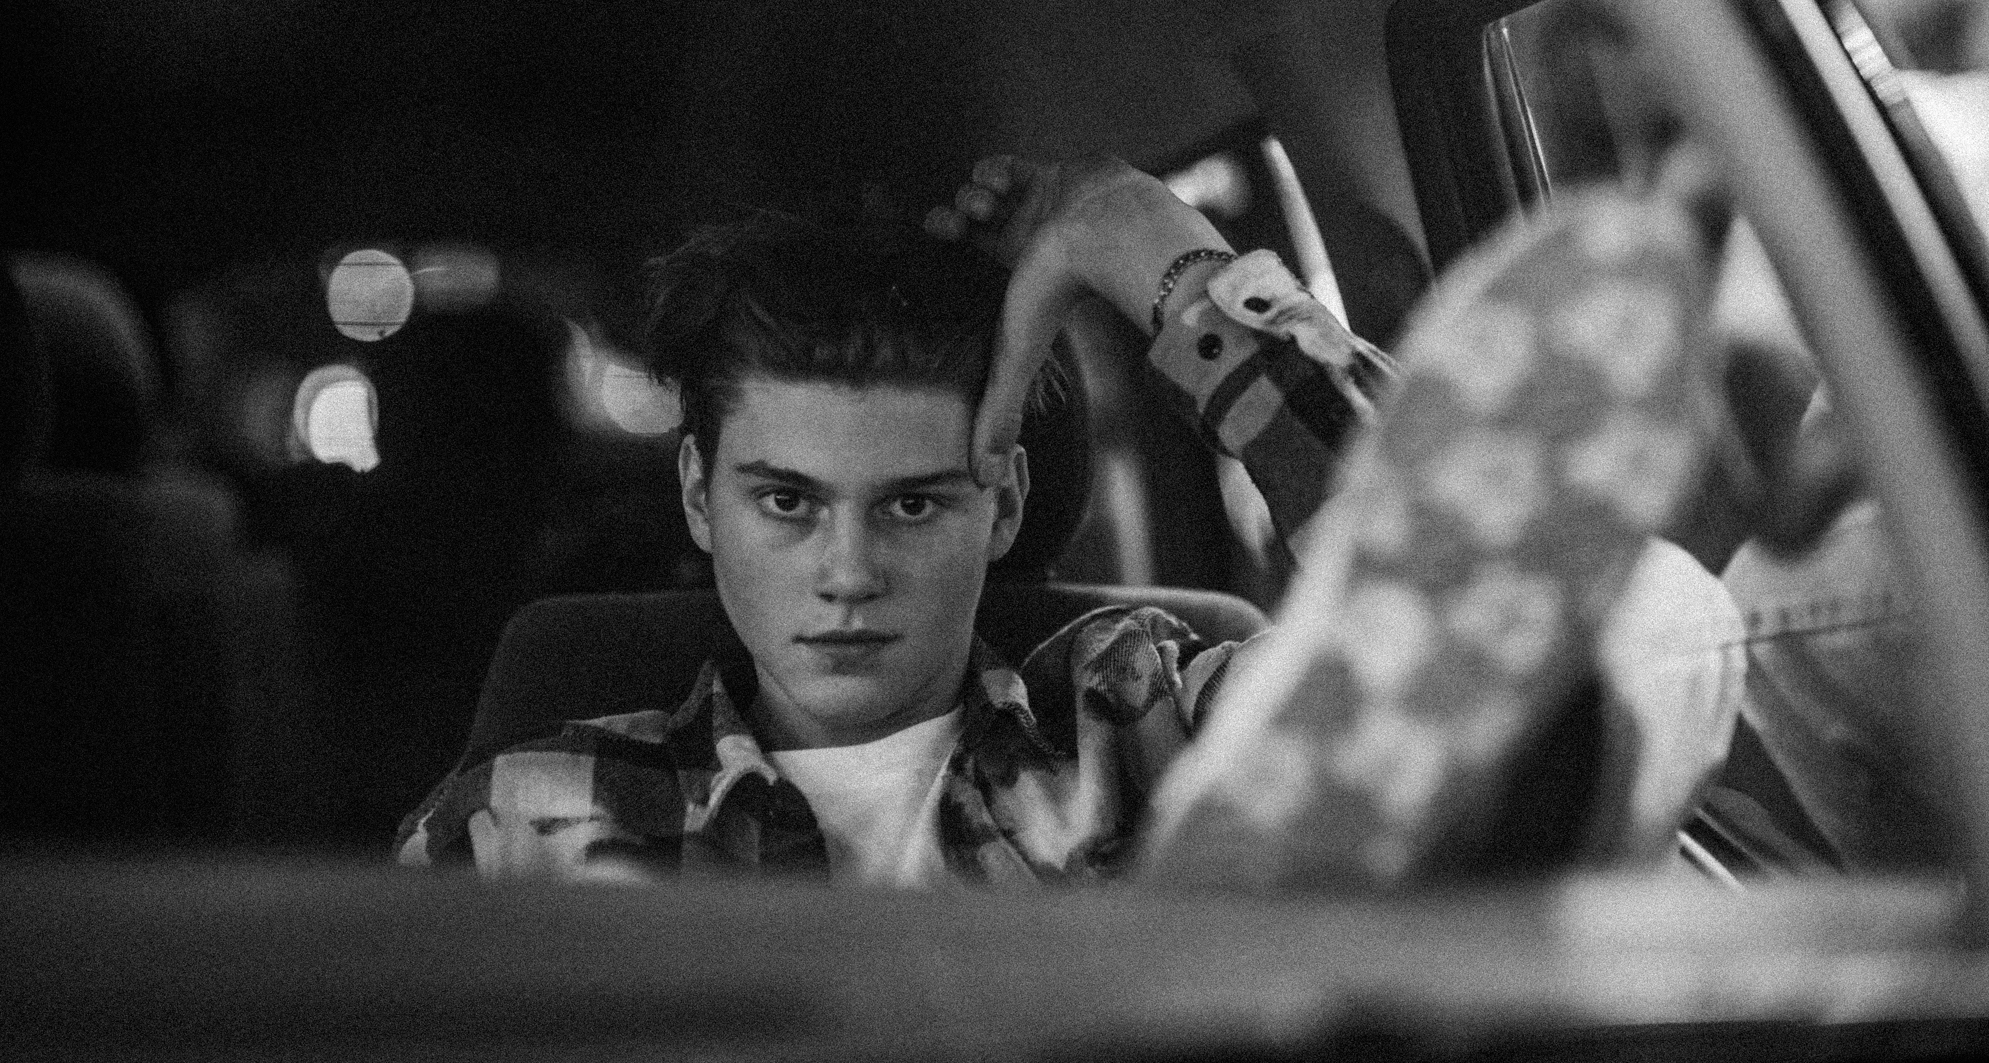 Ruel releases ‘Not Thinkin’ Bout You’ (Acoustic Version) Feat. Billy Davis